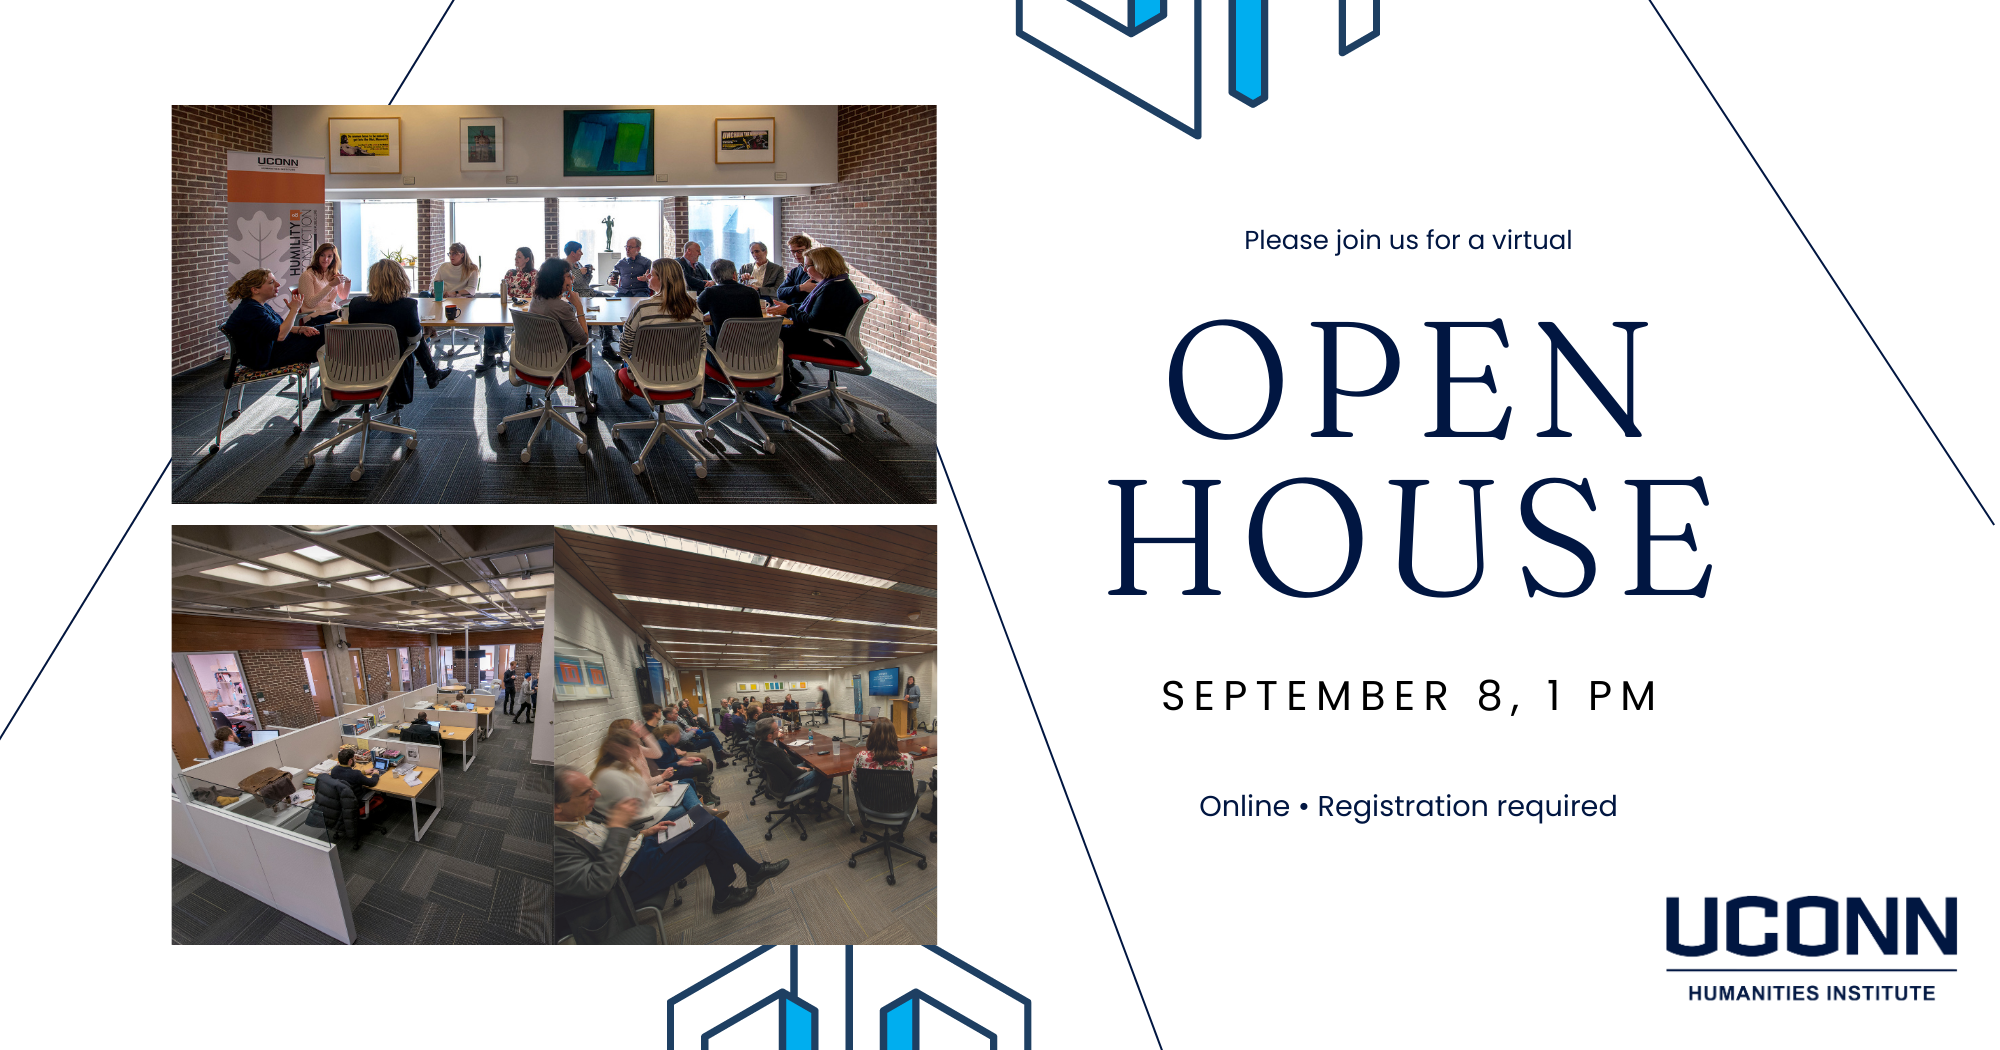 Please join us for a virtual open house, September 8, 1pm. Online. Registration required.